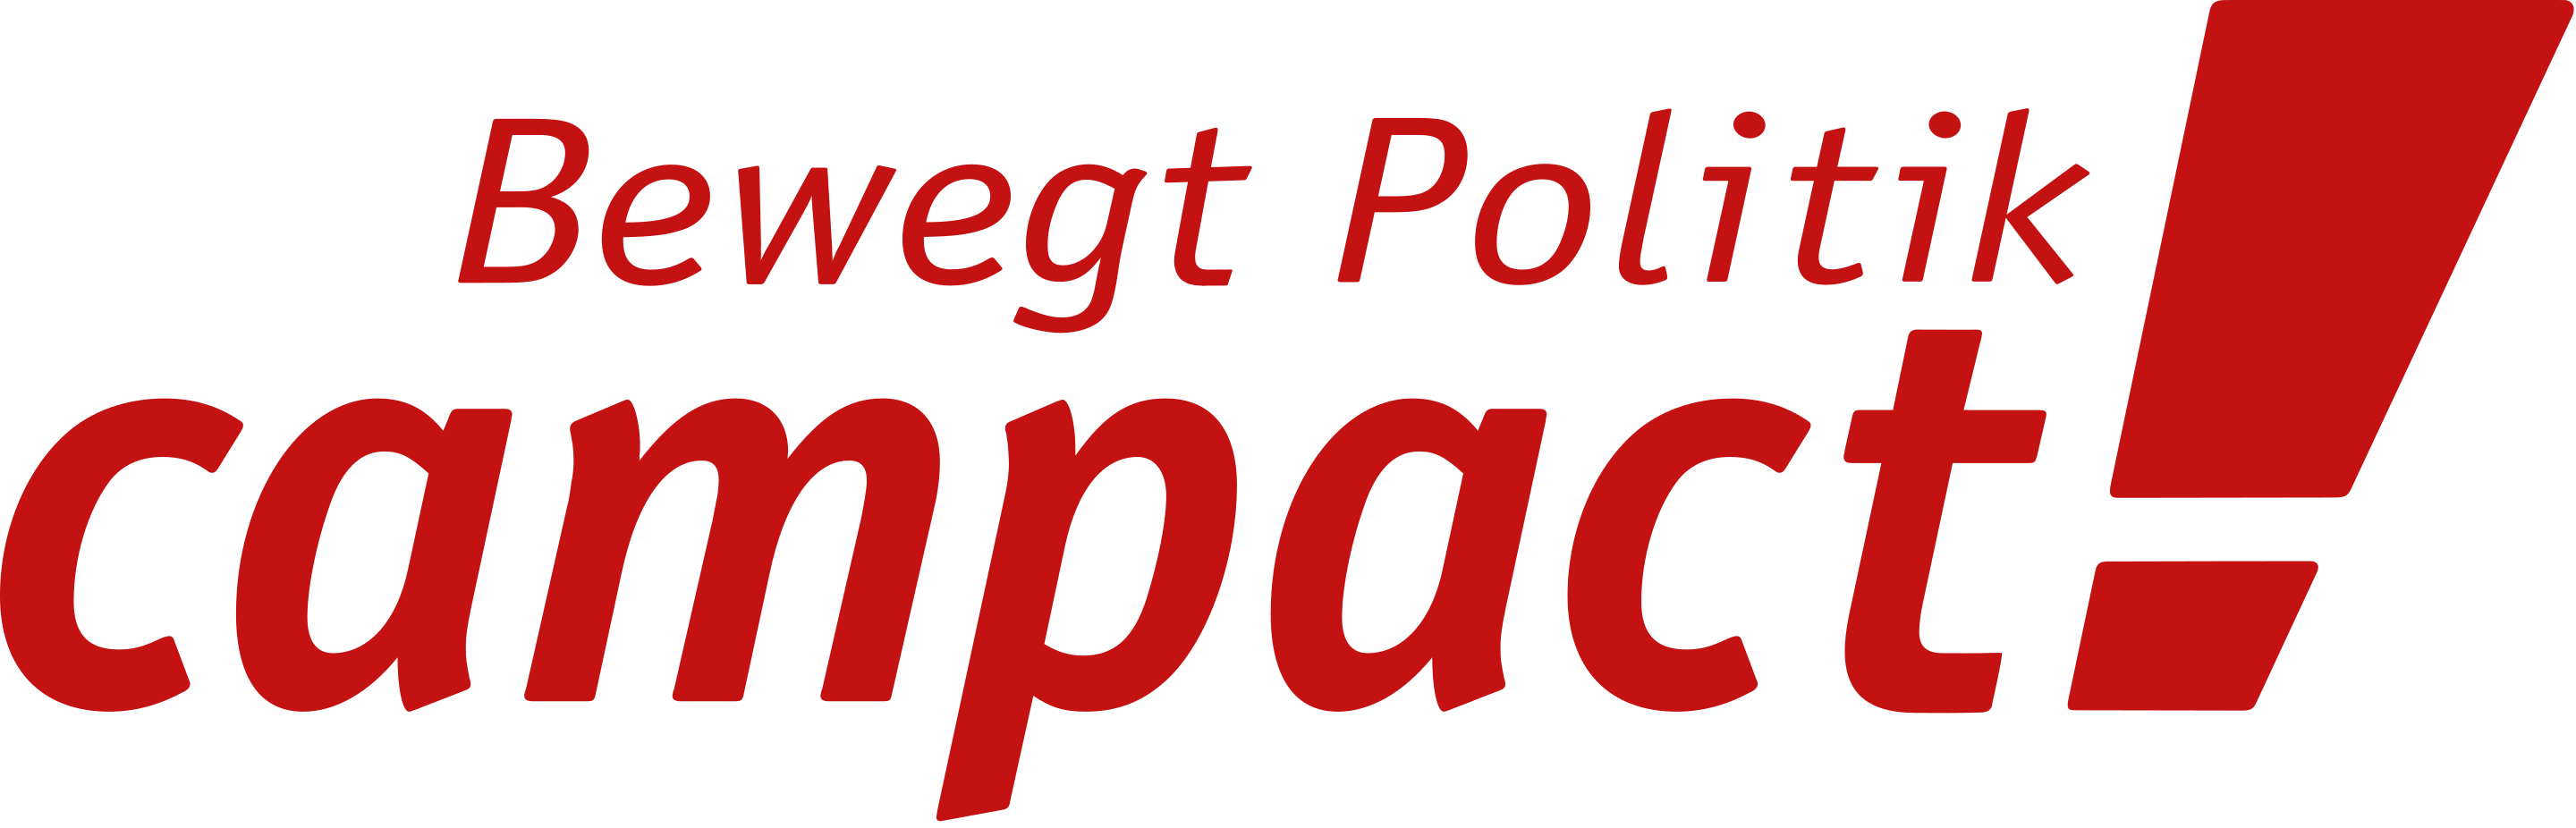 CAMPACT